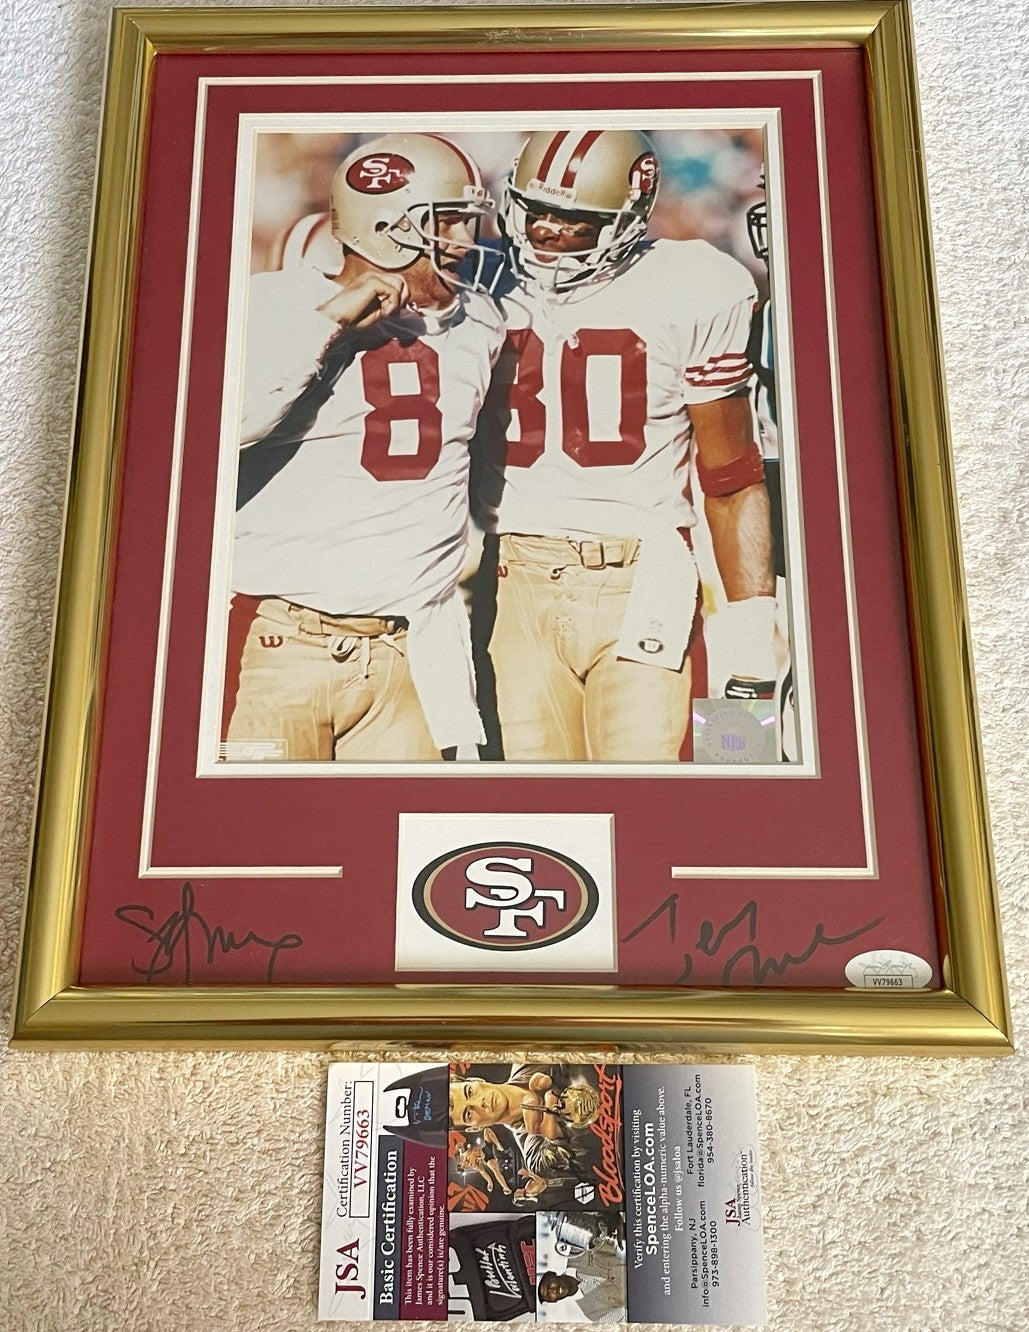 Jerry Rice and Steve Young autographed San Francisco 49ers 11x14 mat framed with 8x10 photo JSA